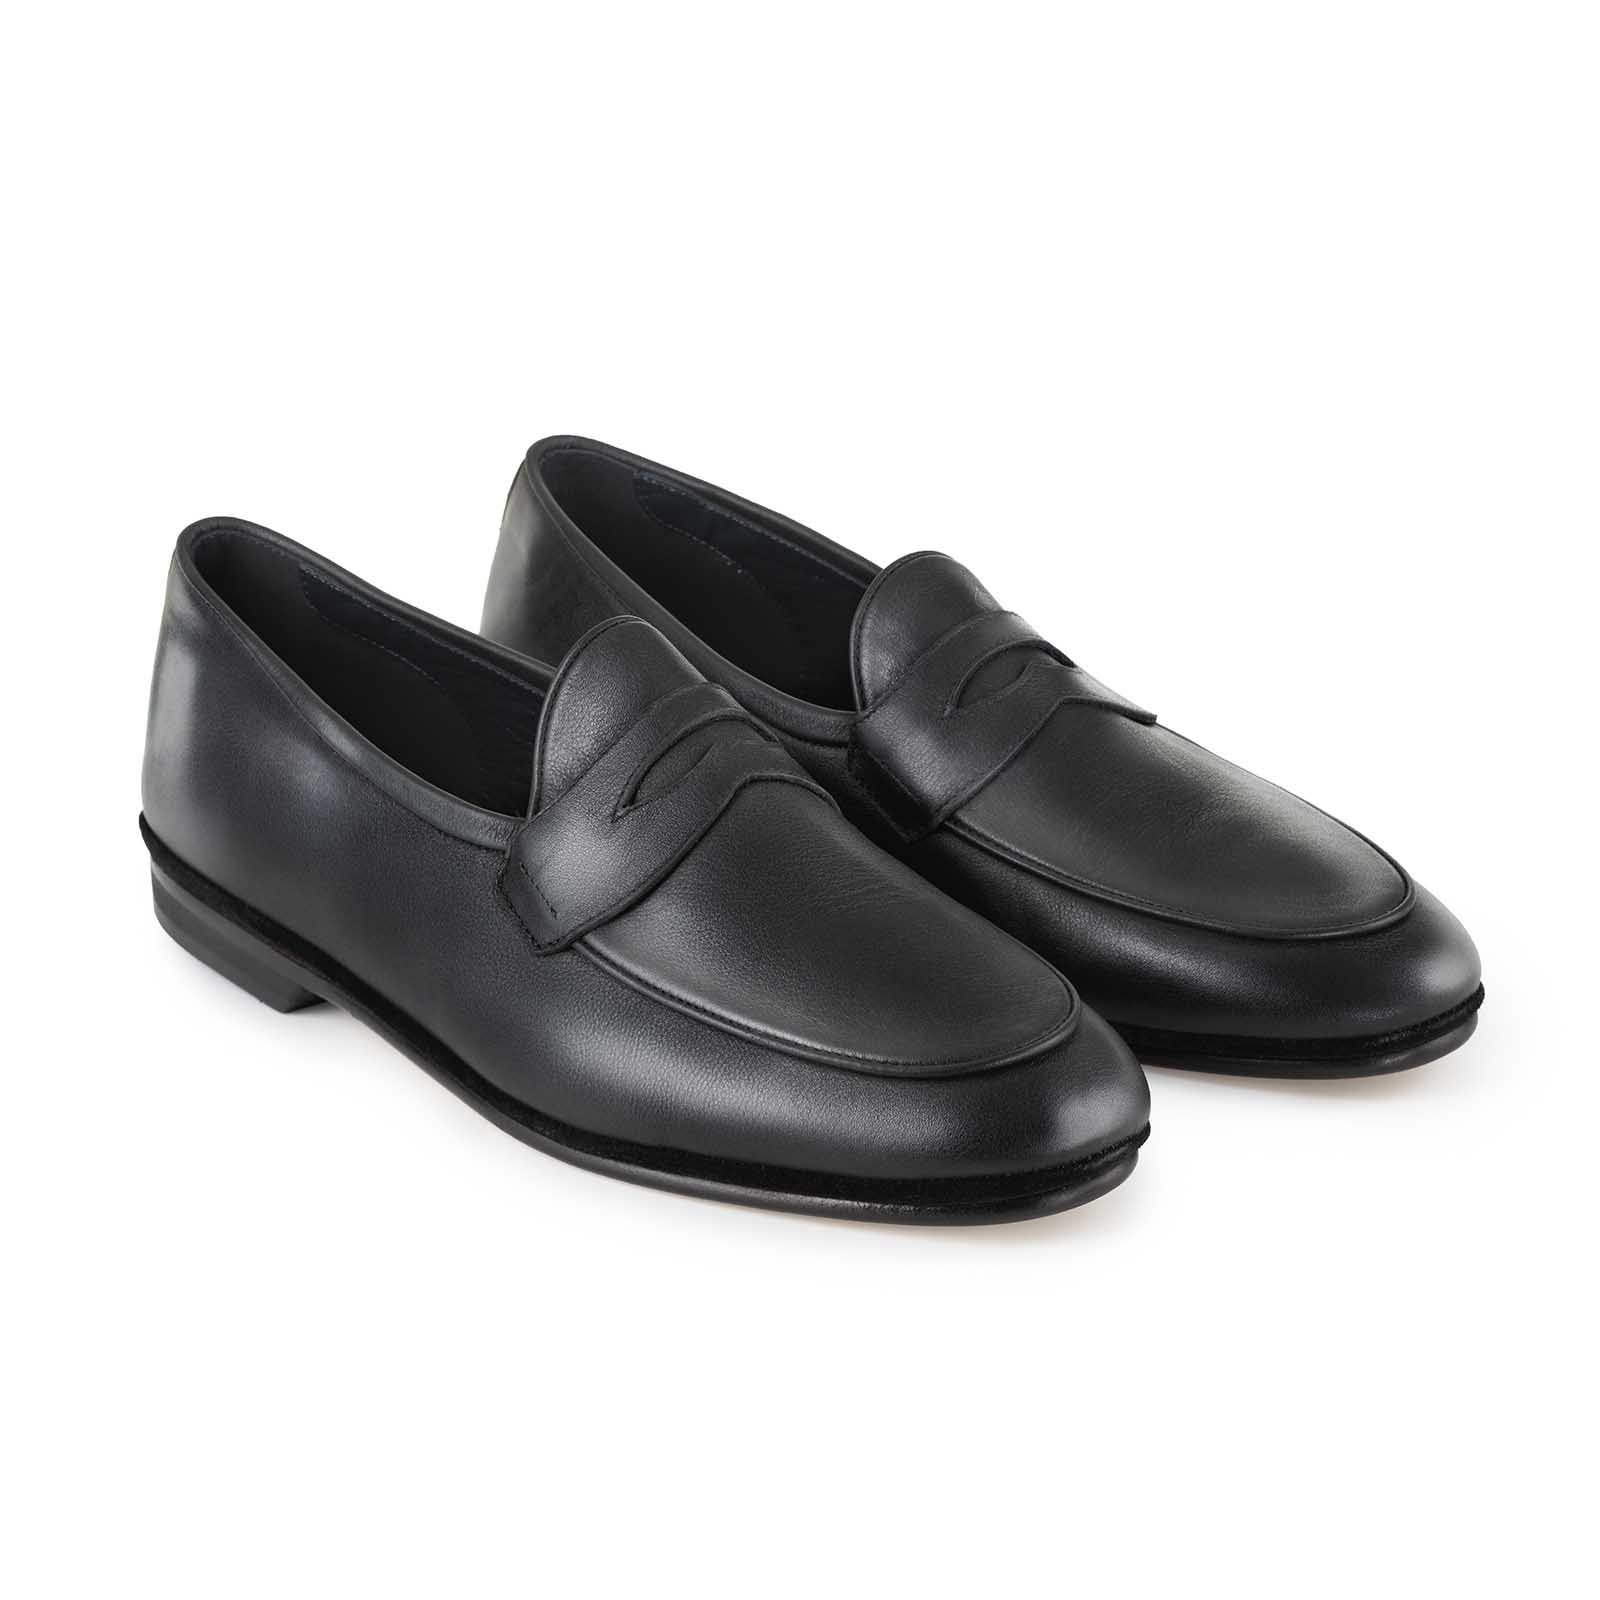 Rubinacci Penny Loafers: Tradition Meets Modern Elegance at Sprezza ...